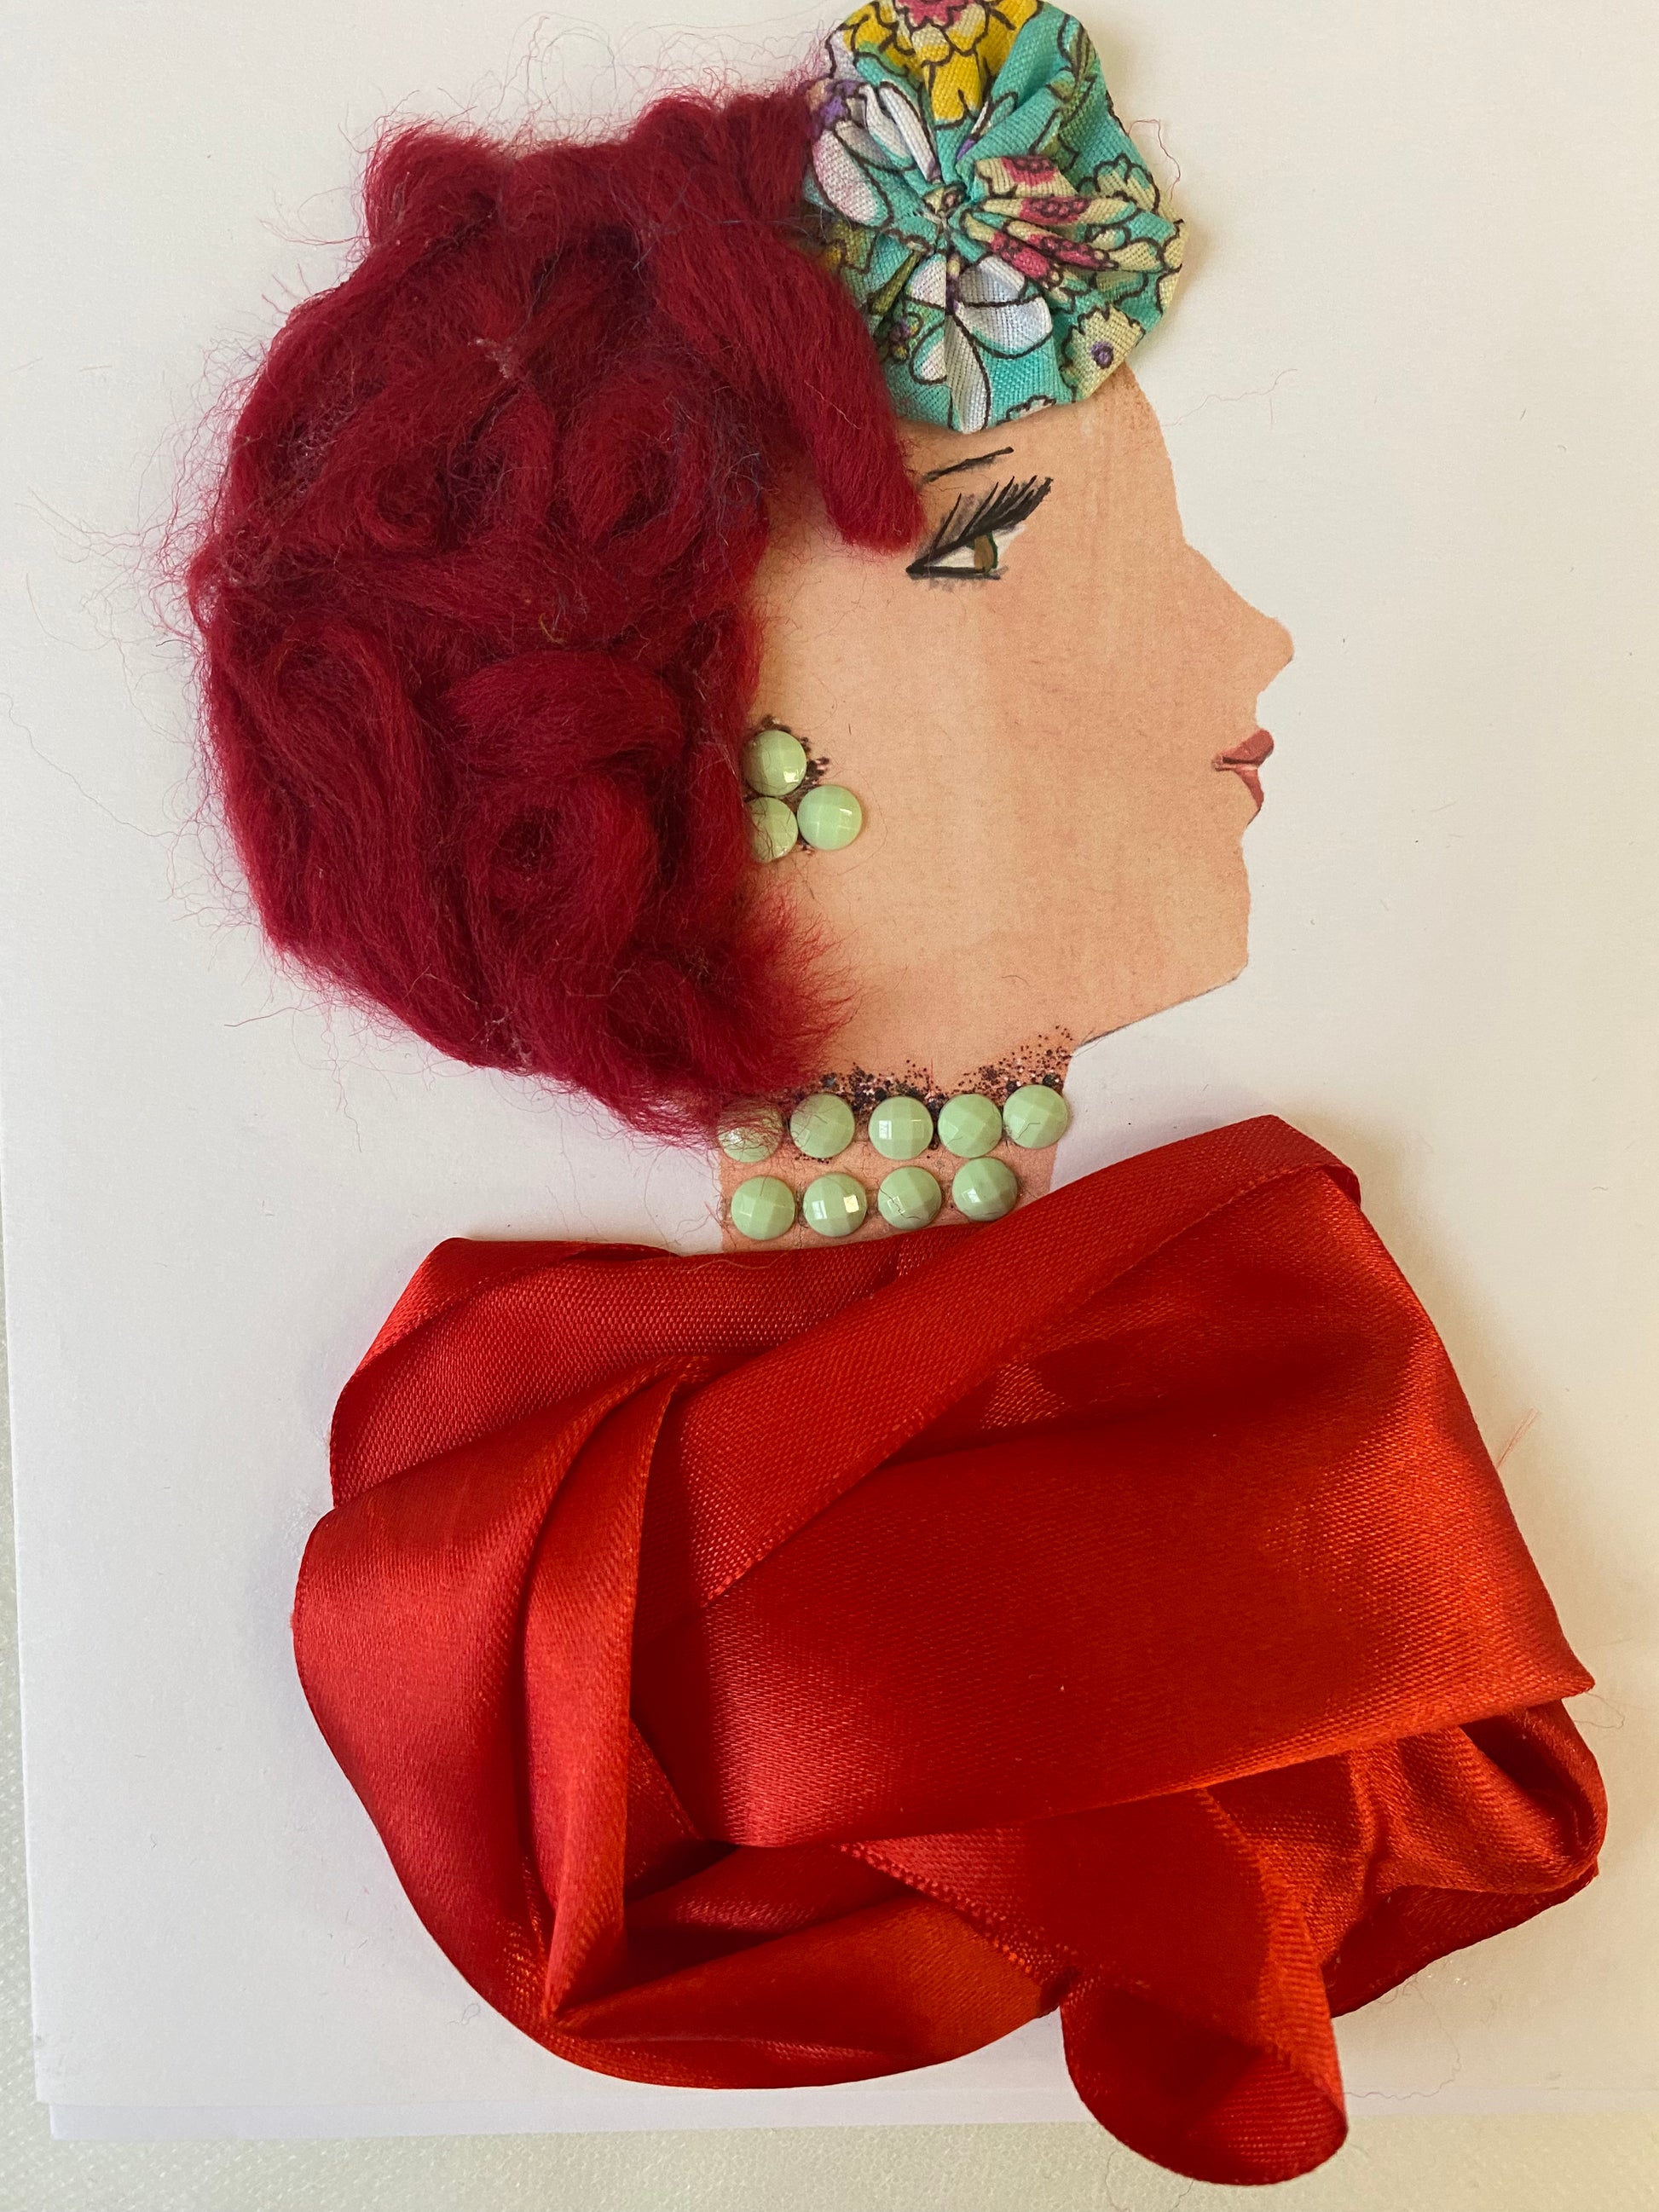 I designed this card of a woman named Gallery Red. She has a white skin tone and wears blue floral head piece in her redish purple hair. She wears a silk red blouse. She wears green gems as her jewellery. 